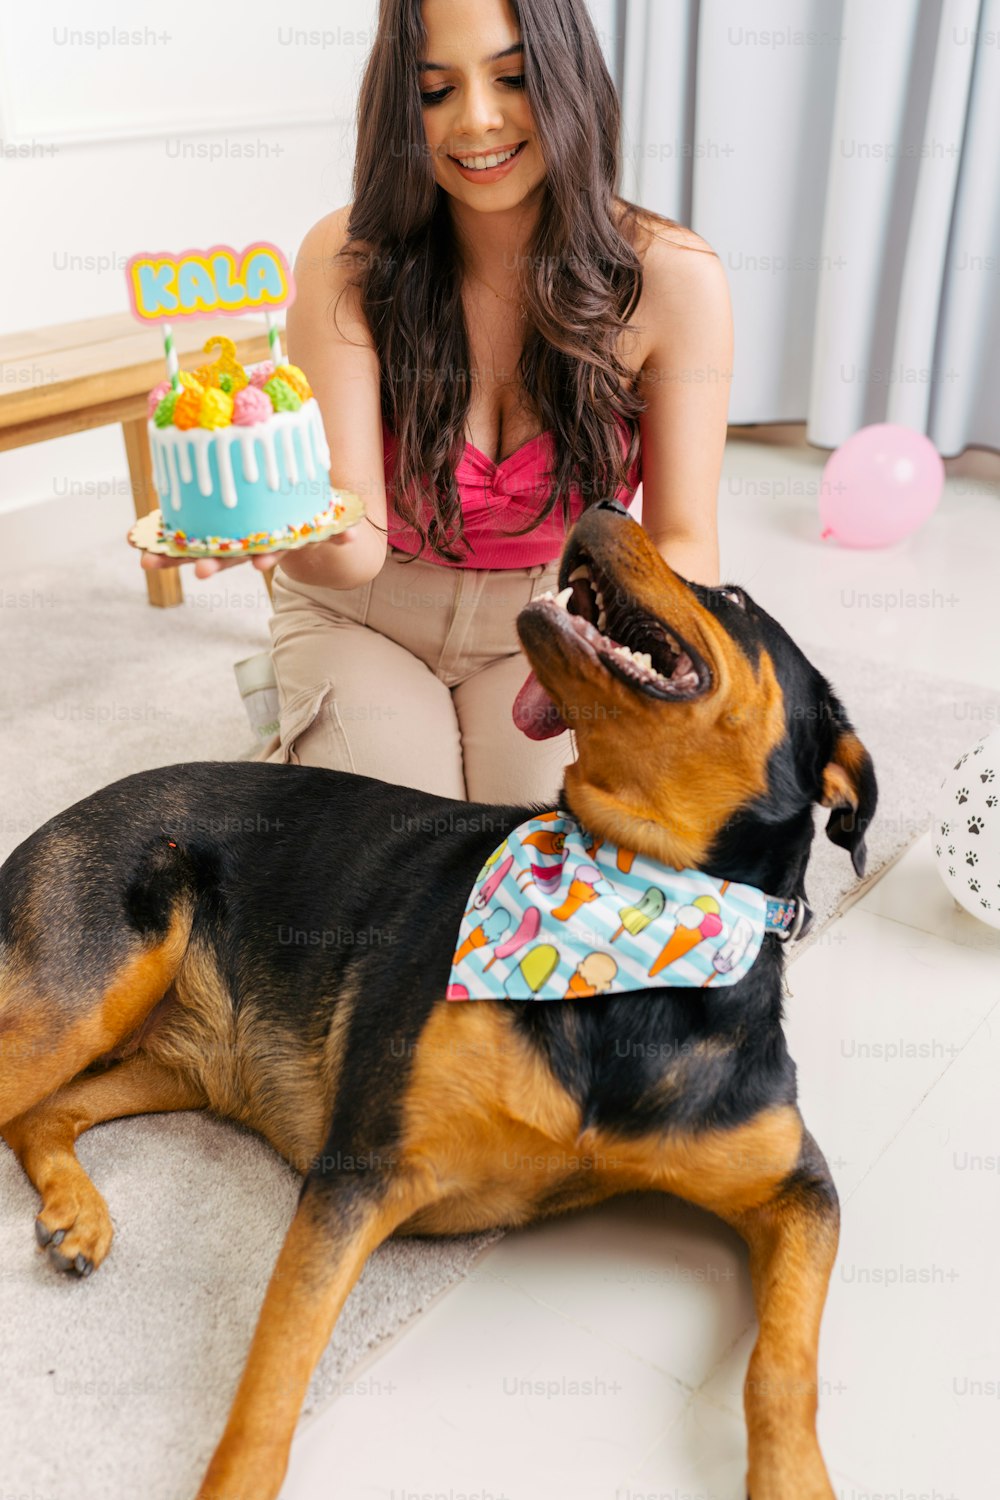 a woman kneeling down next to a dog with a birthday cake